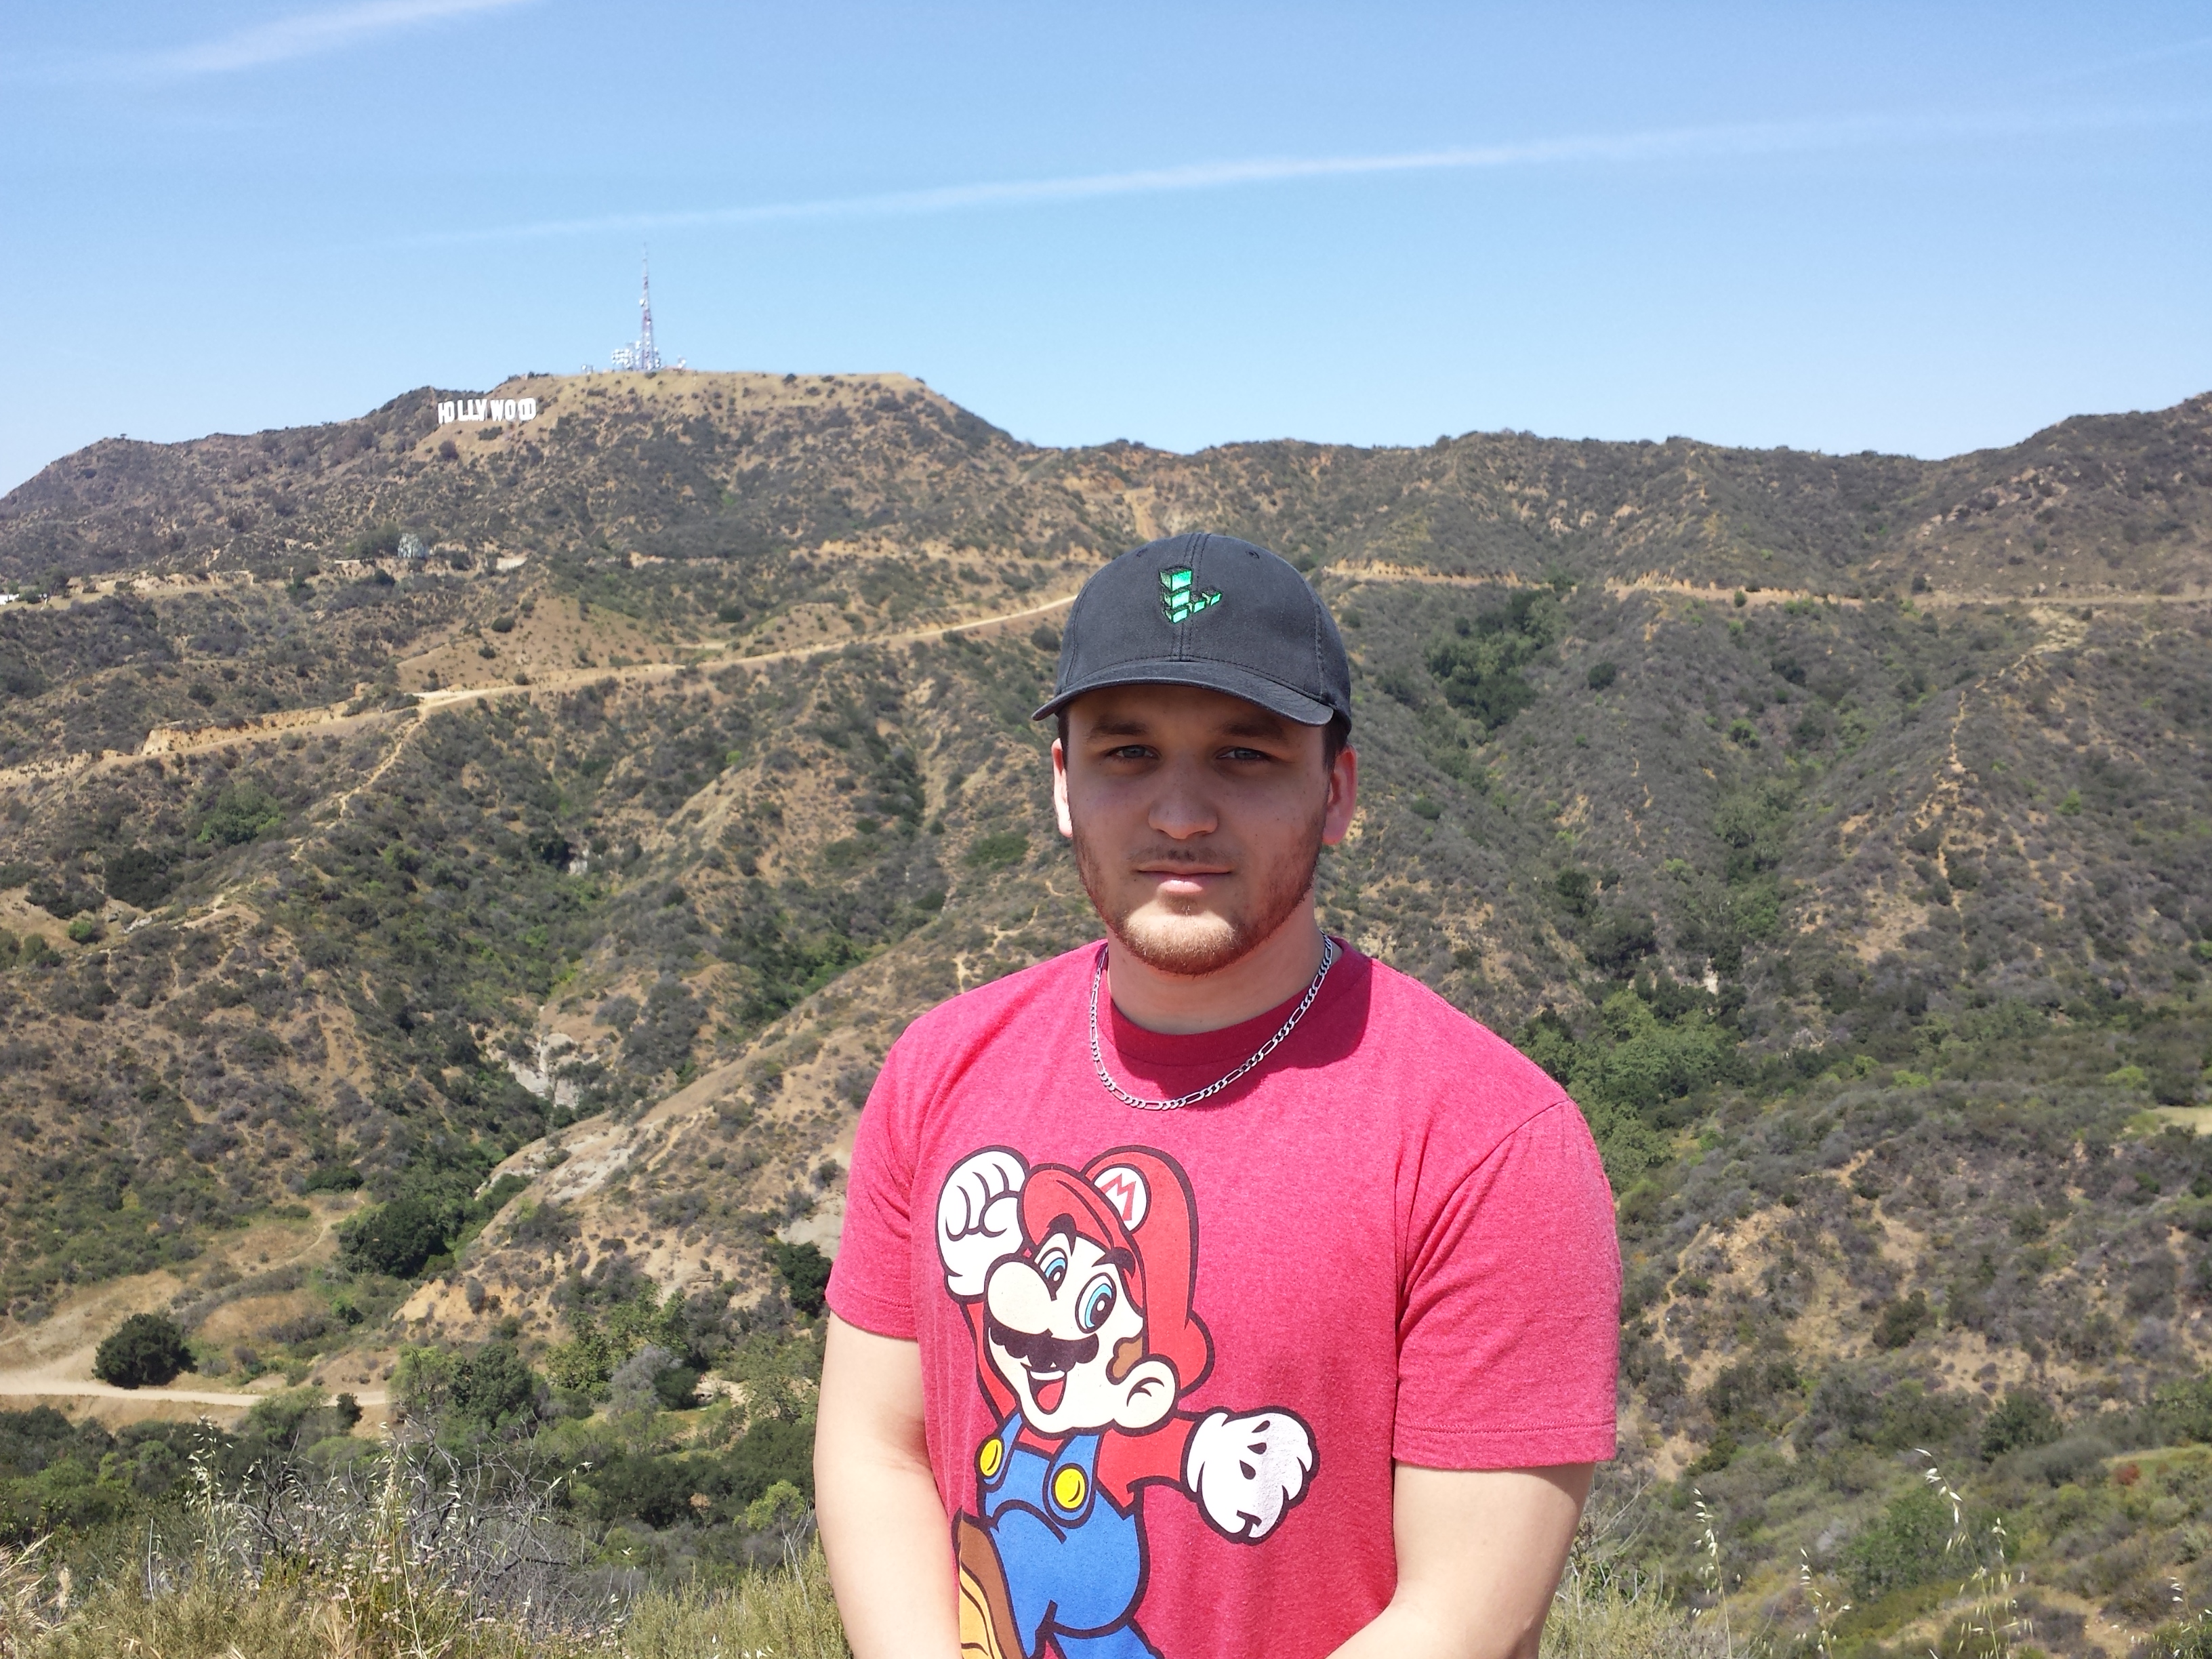 Just checking if there were any developers by the Hollywood sign =)